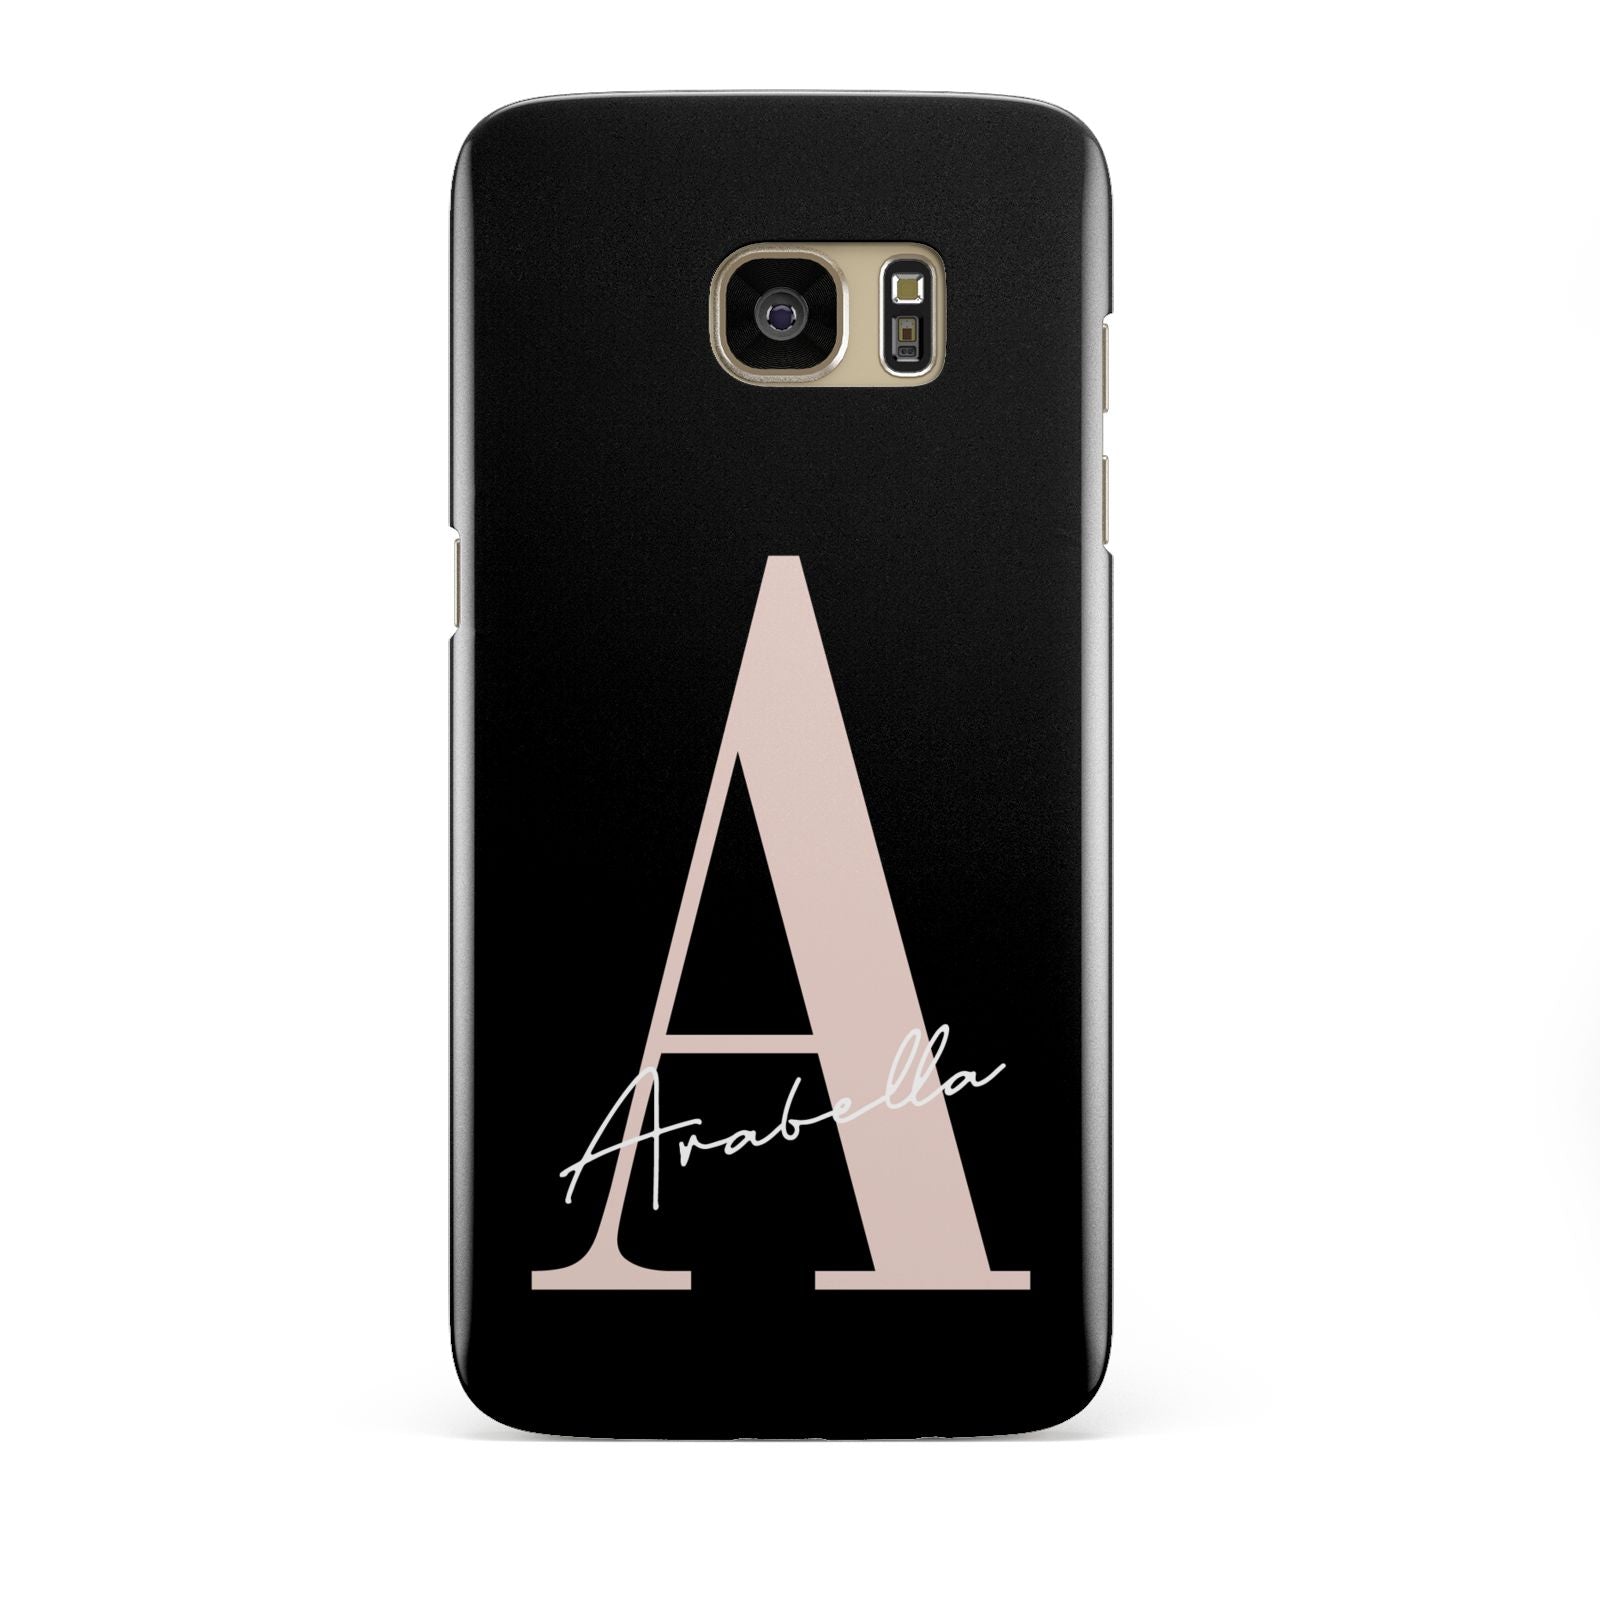 Personalised Black Pink Initial Samsung Galaxy S7 Edge Case